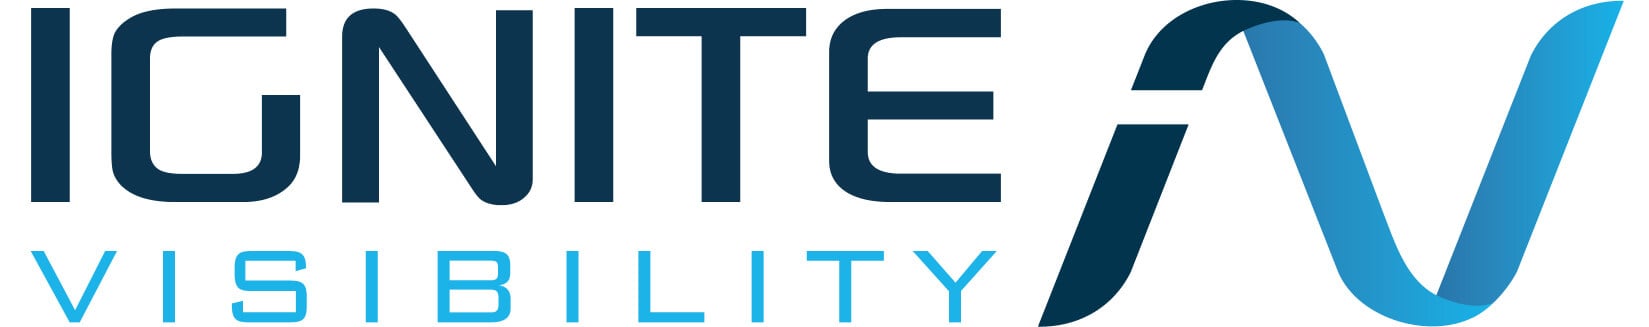 Top ORM Business Logo: Ignite Visibility